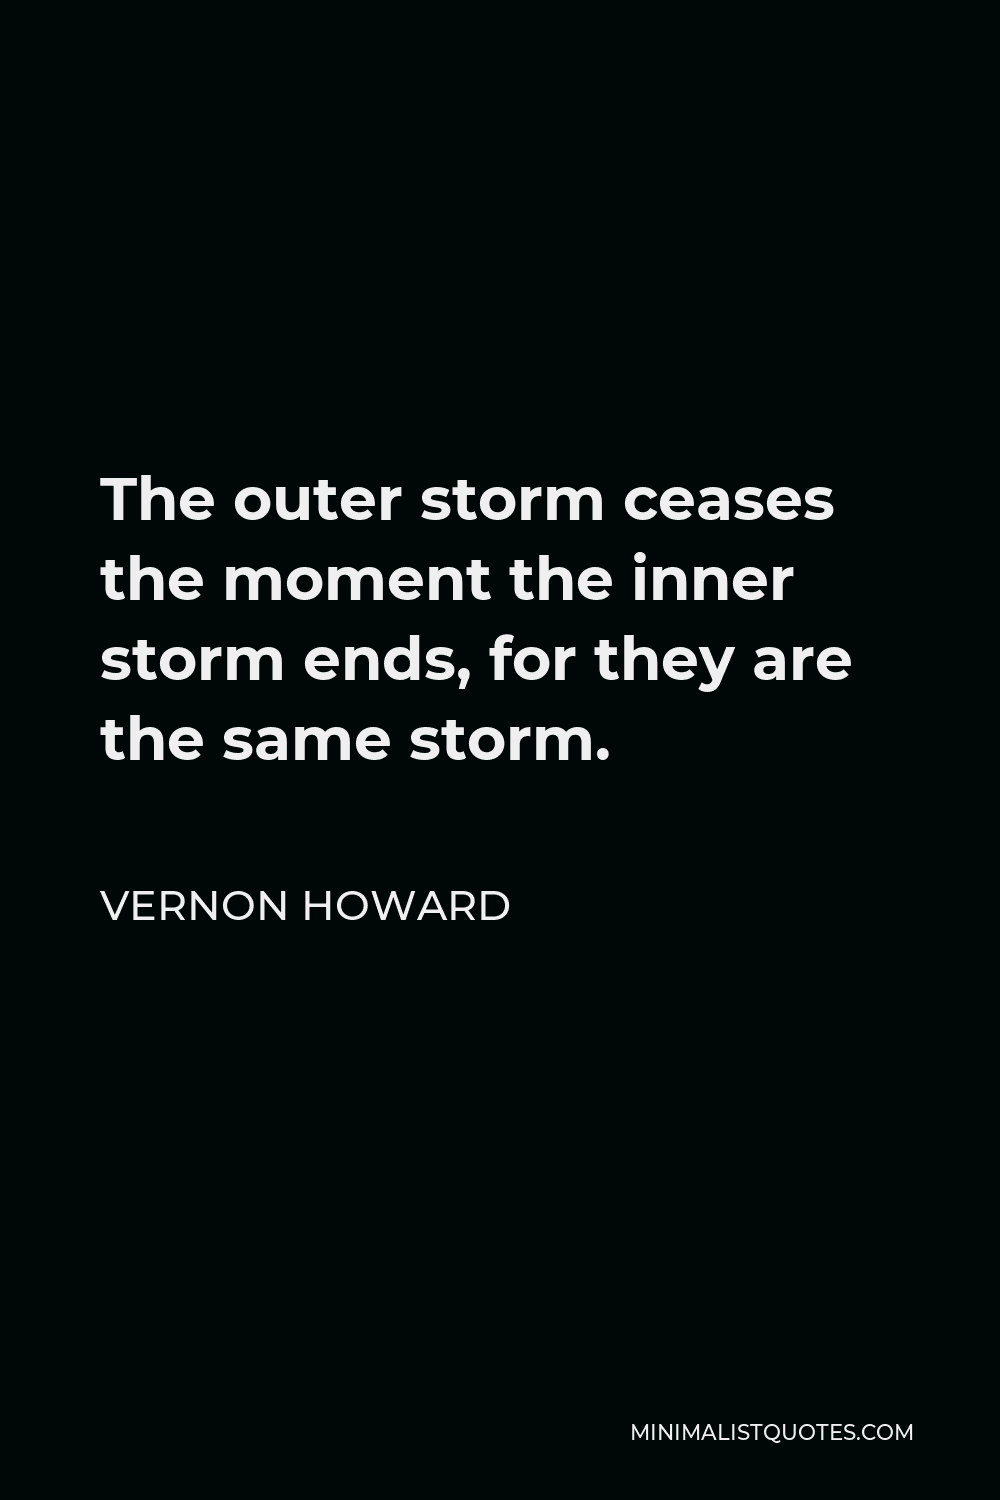 Vernon Howard Quote - The outer storm ceases the moment the inner storm ends, for they are the same storm.